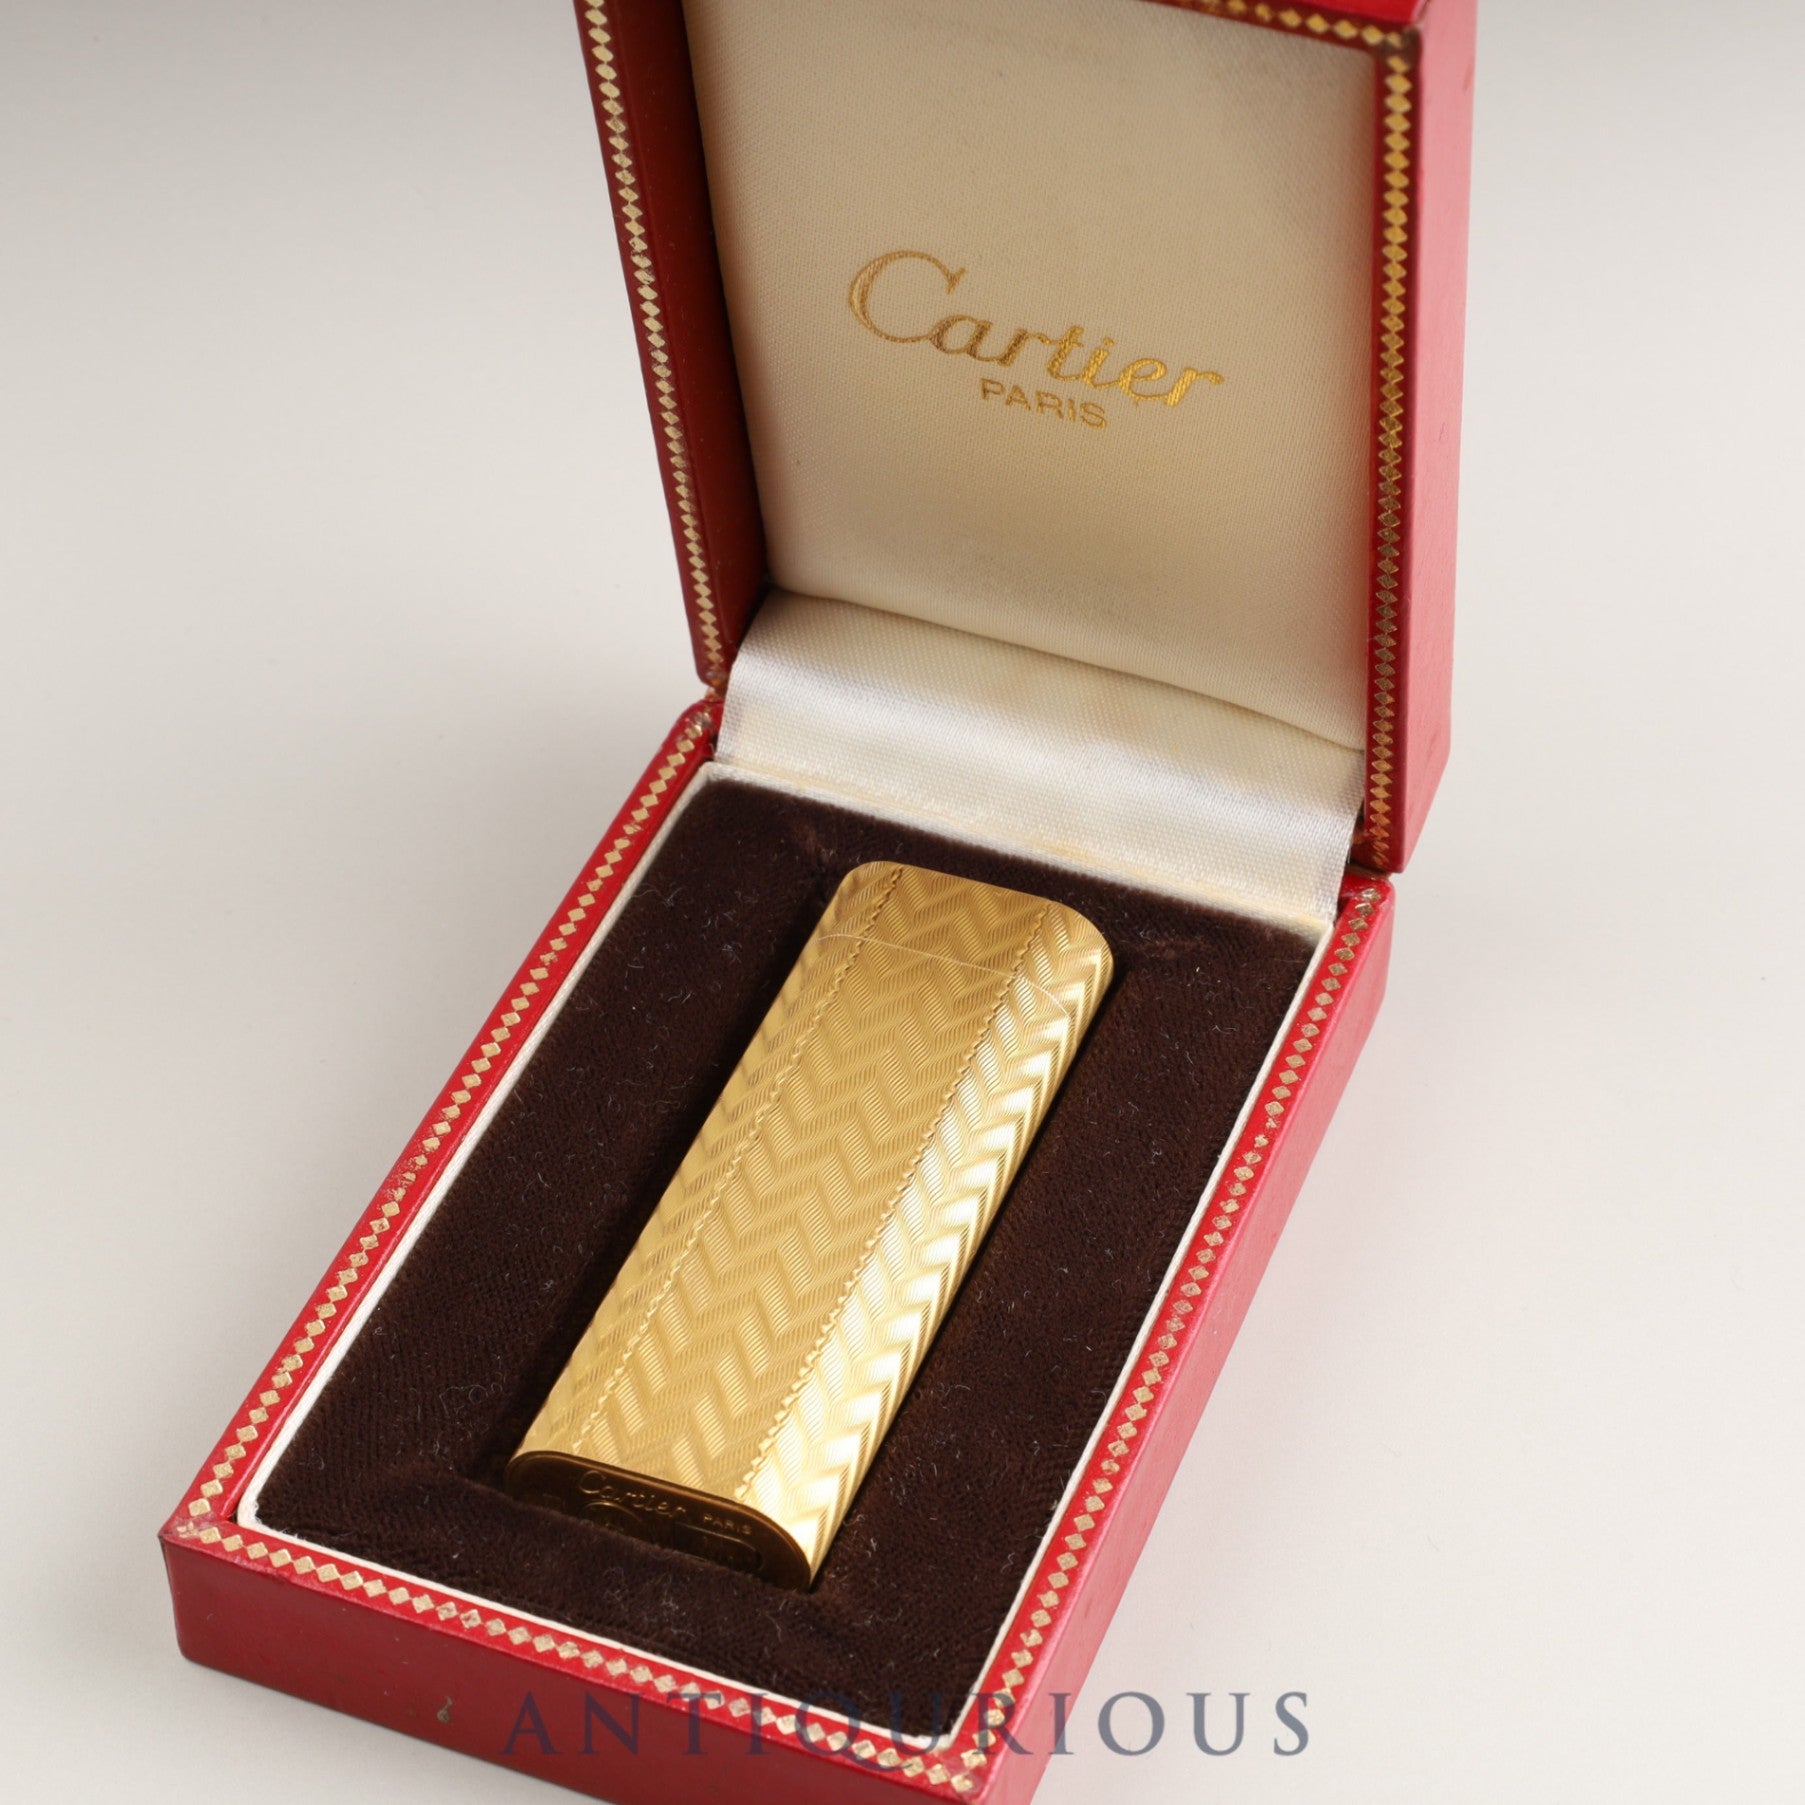 CARTIER Cartier lighter oval GP guilloche box machine adjusted